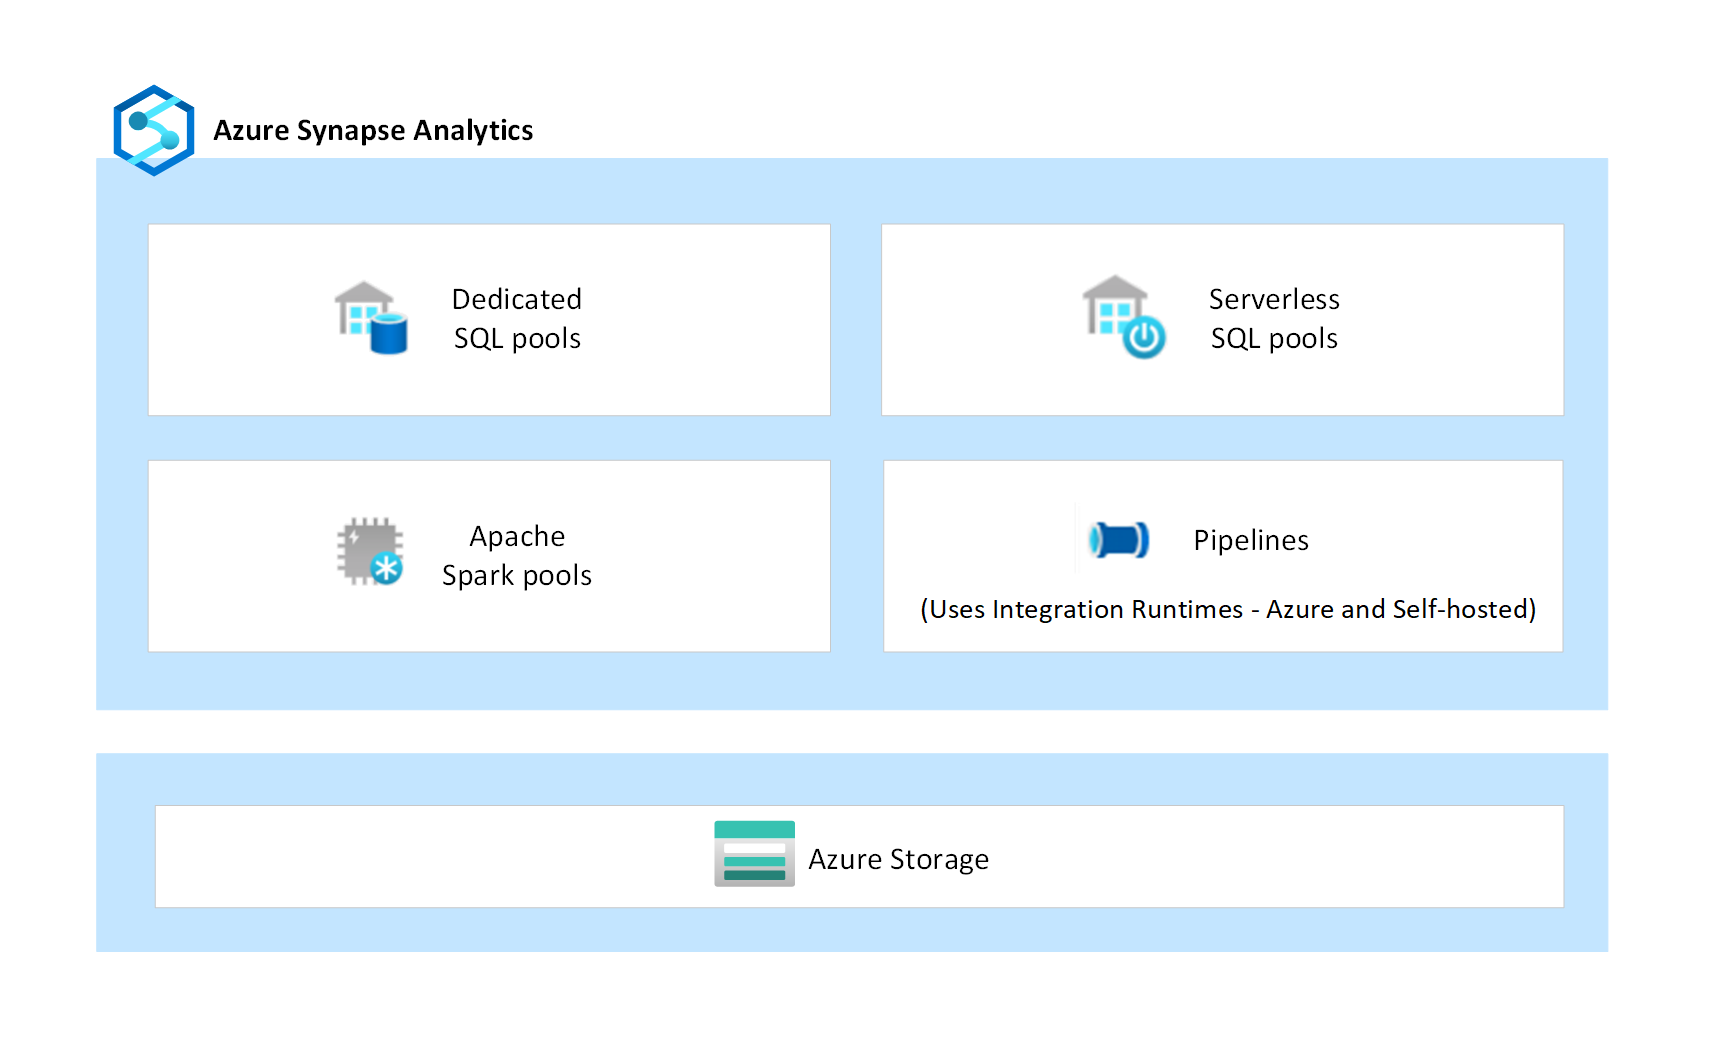 Diagram of Azure Synapse components showing dedicated SQL pools, serverless SQL pools, Apache Spark pools, and pipelines.